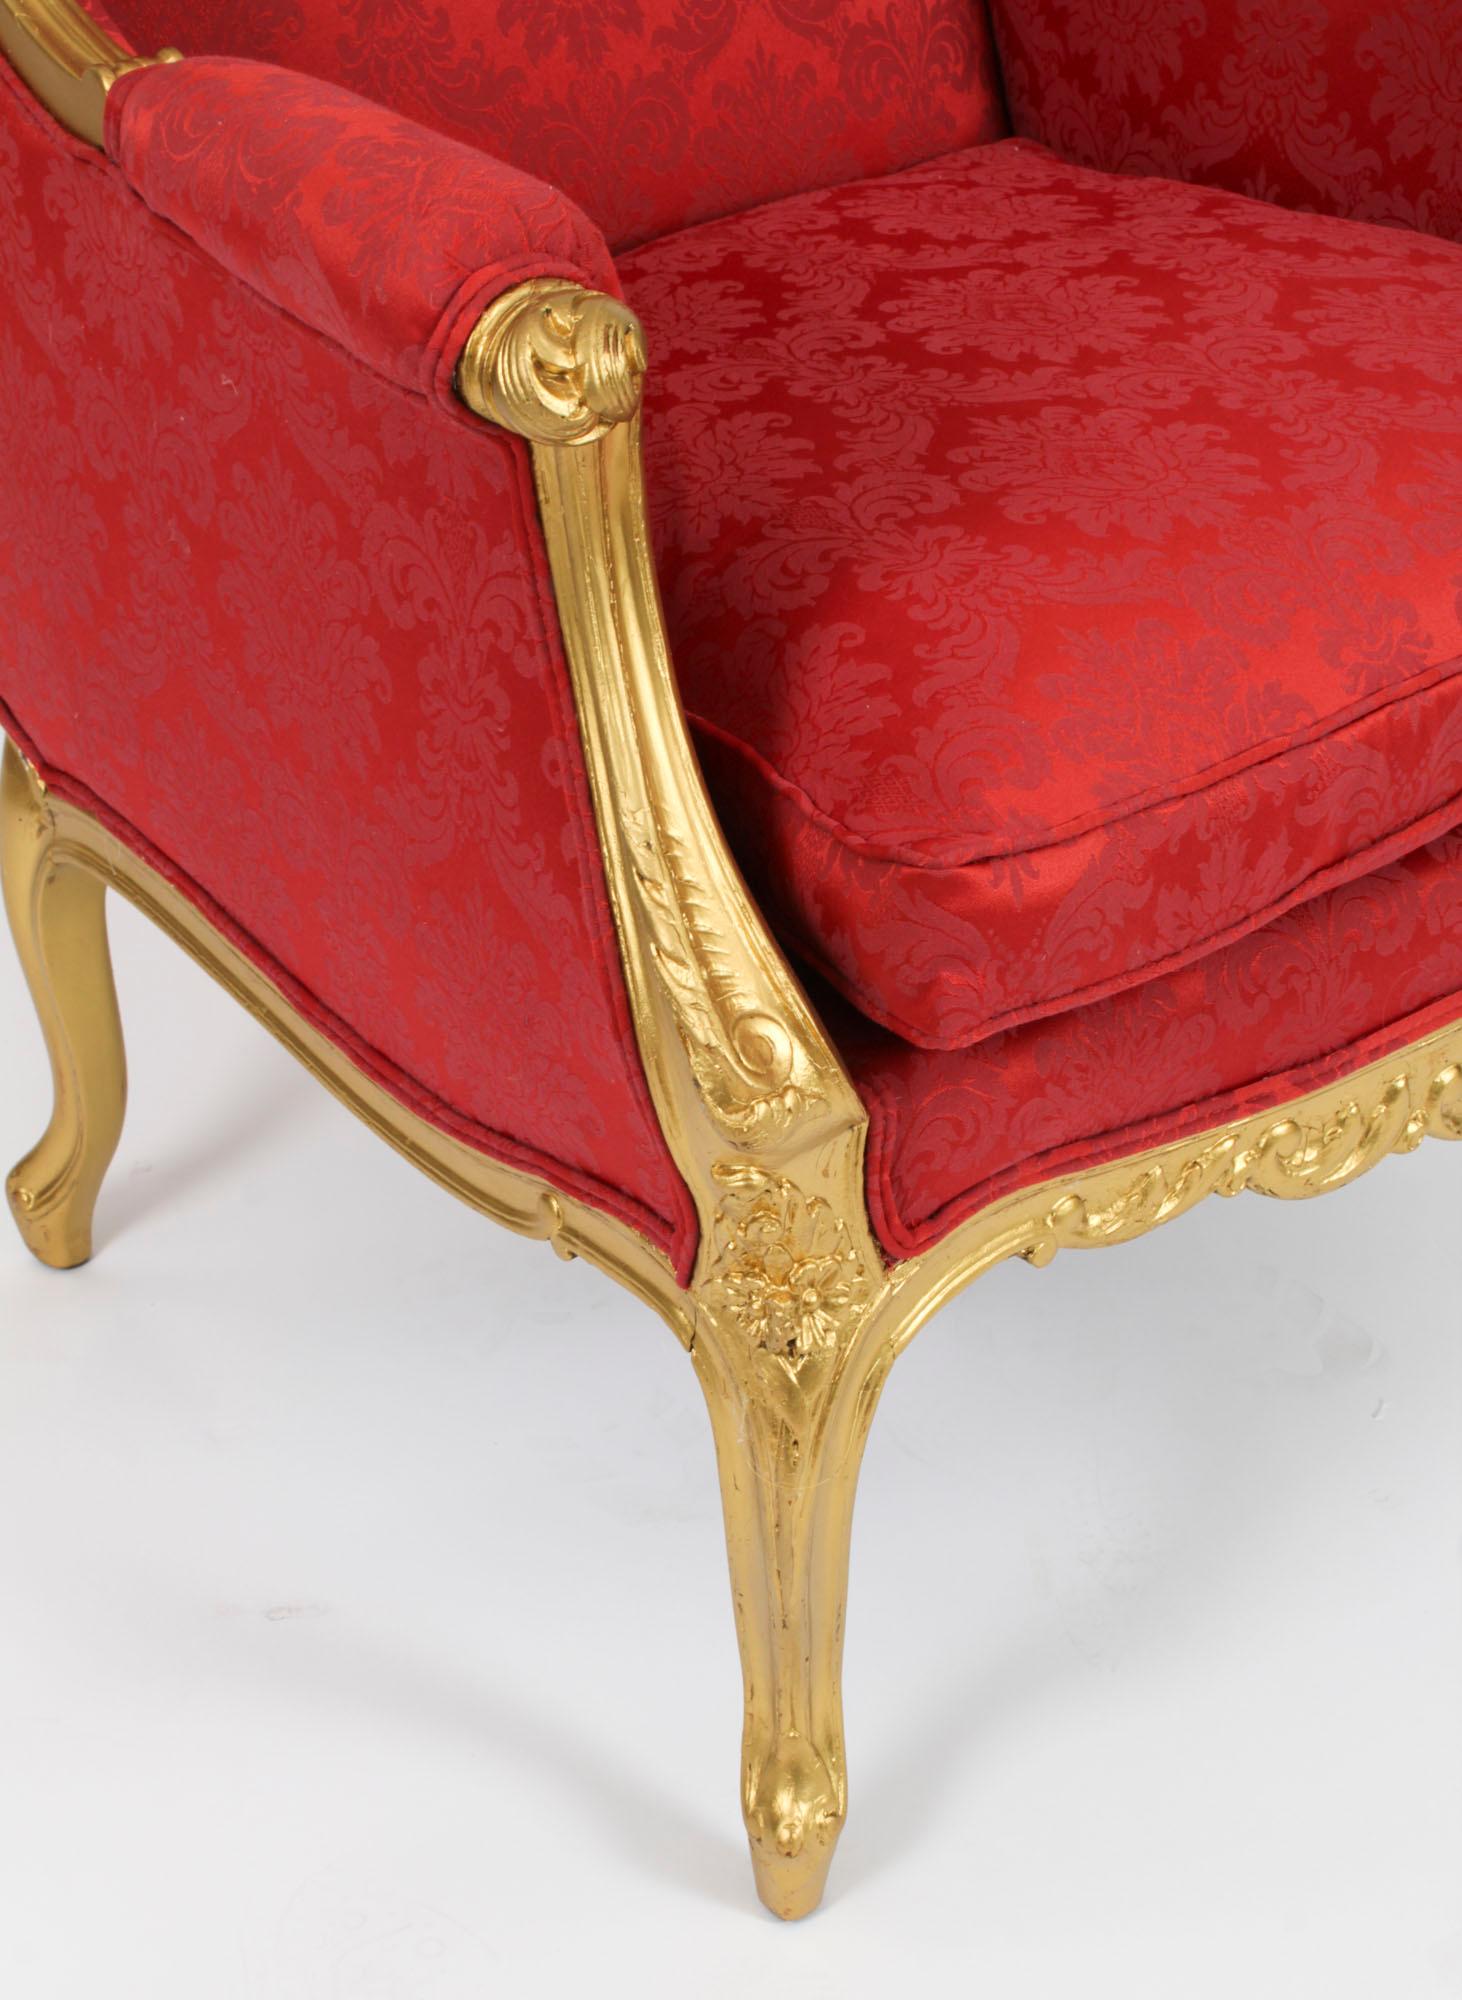 Antique Louis XV Revival Giltwood Shaped Bergere Armchair, 19th Century For Sale 5